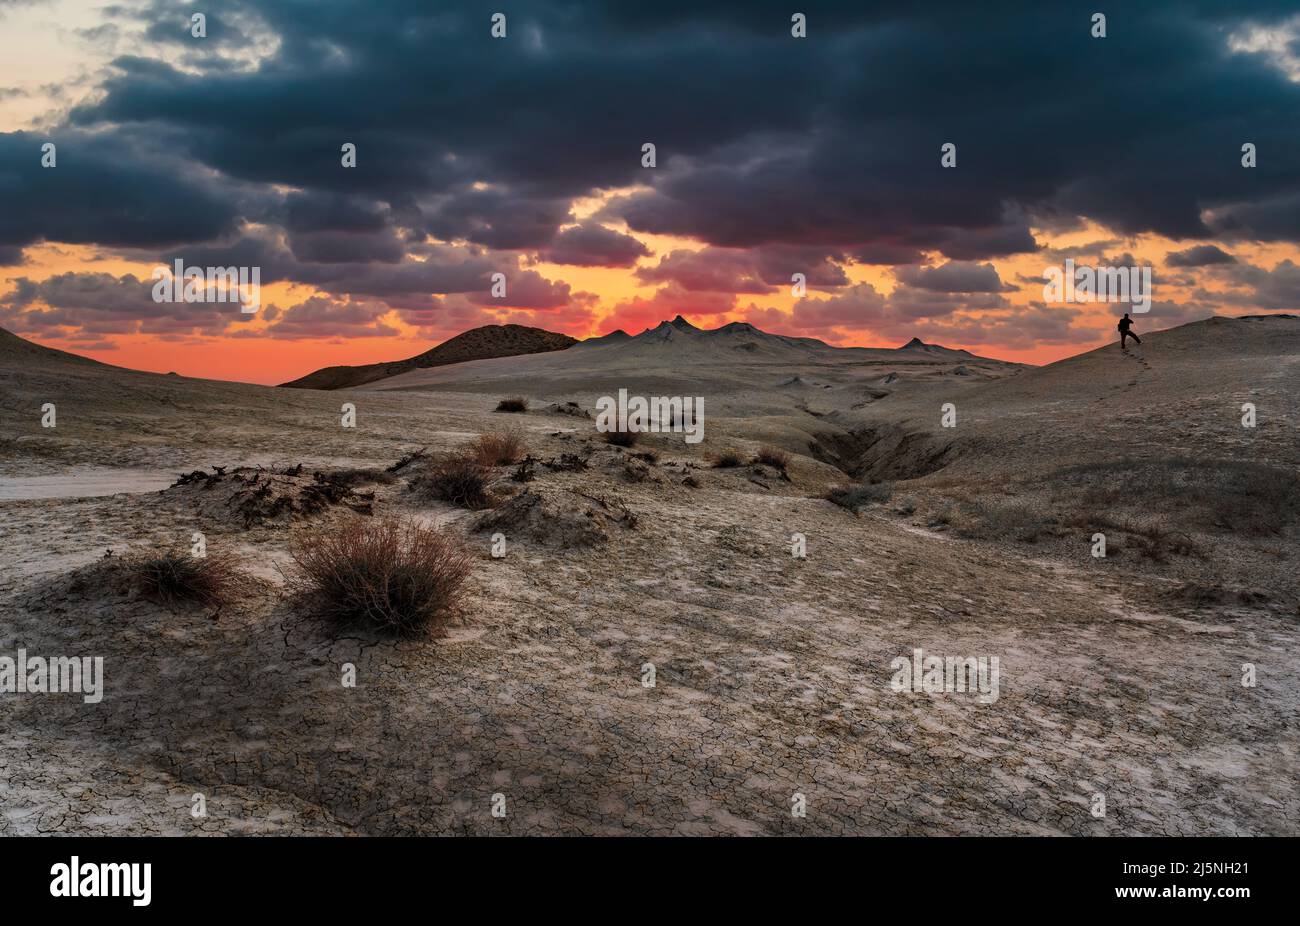 Landscape with mud volcanoes in the mountains at sunset Stock Photo